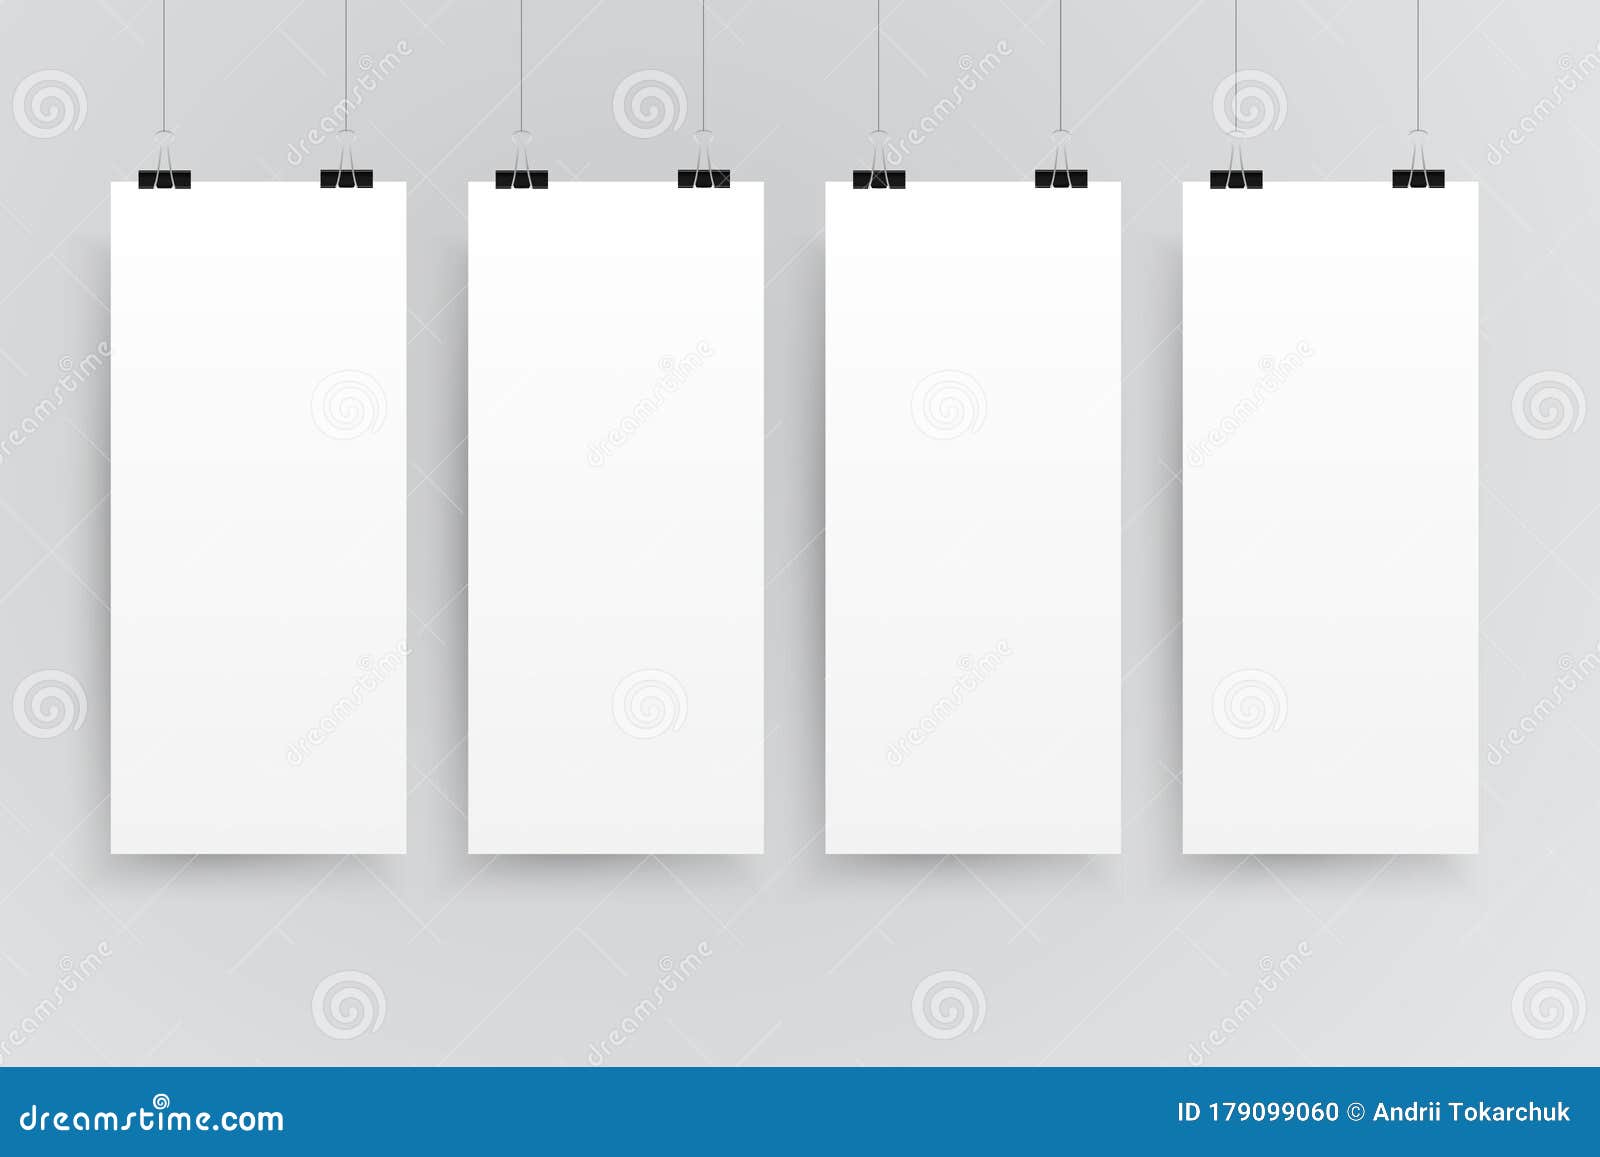 A4 paper form vertical Royalty Free Vector Image